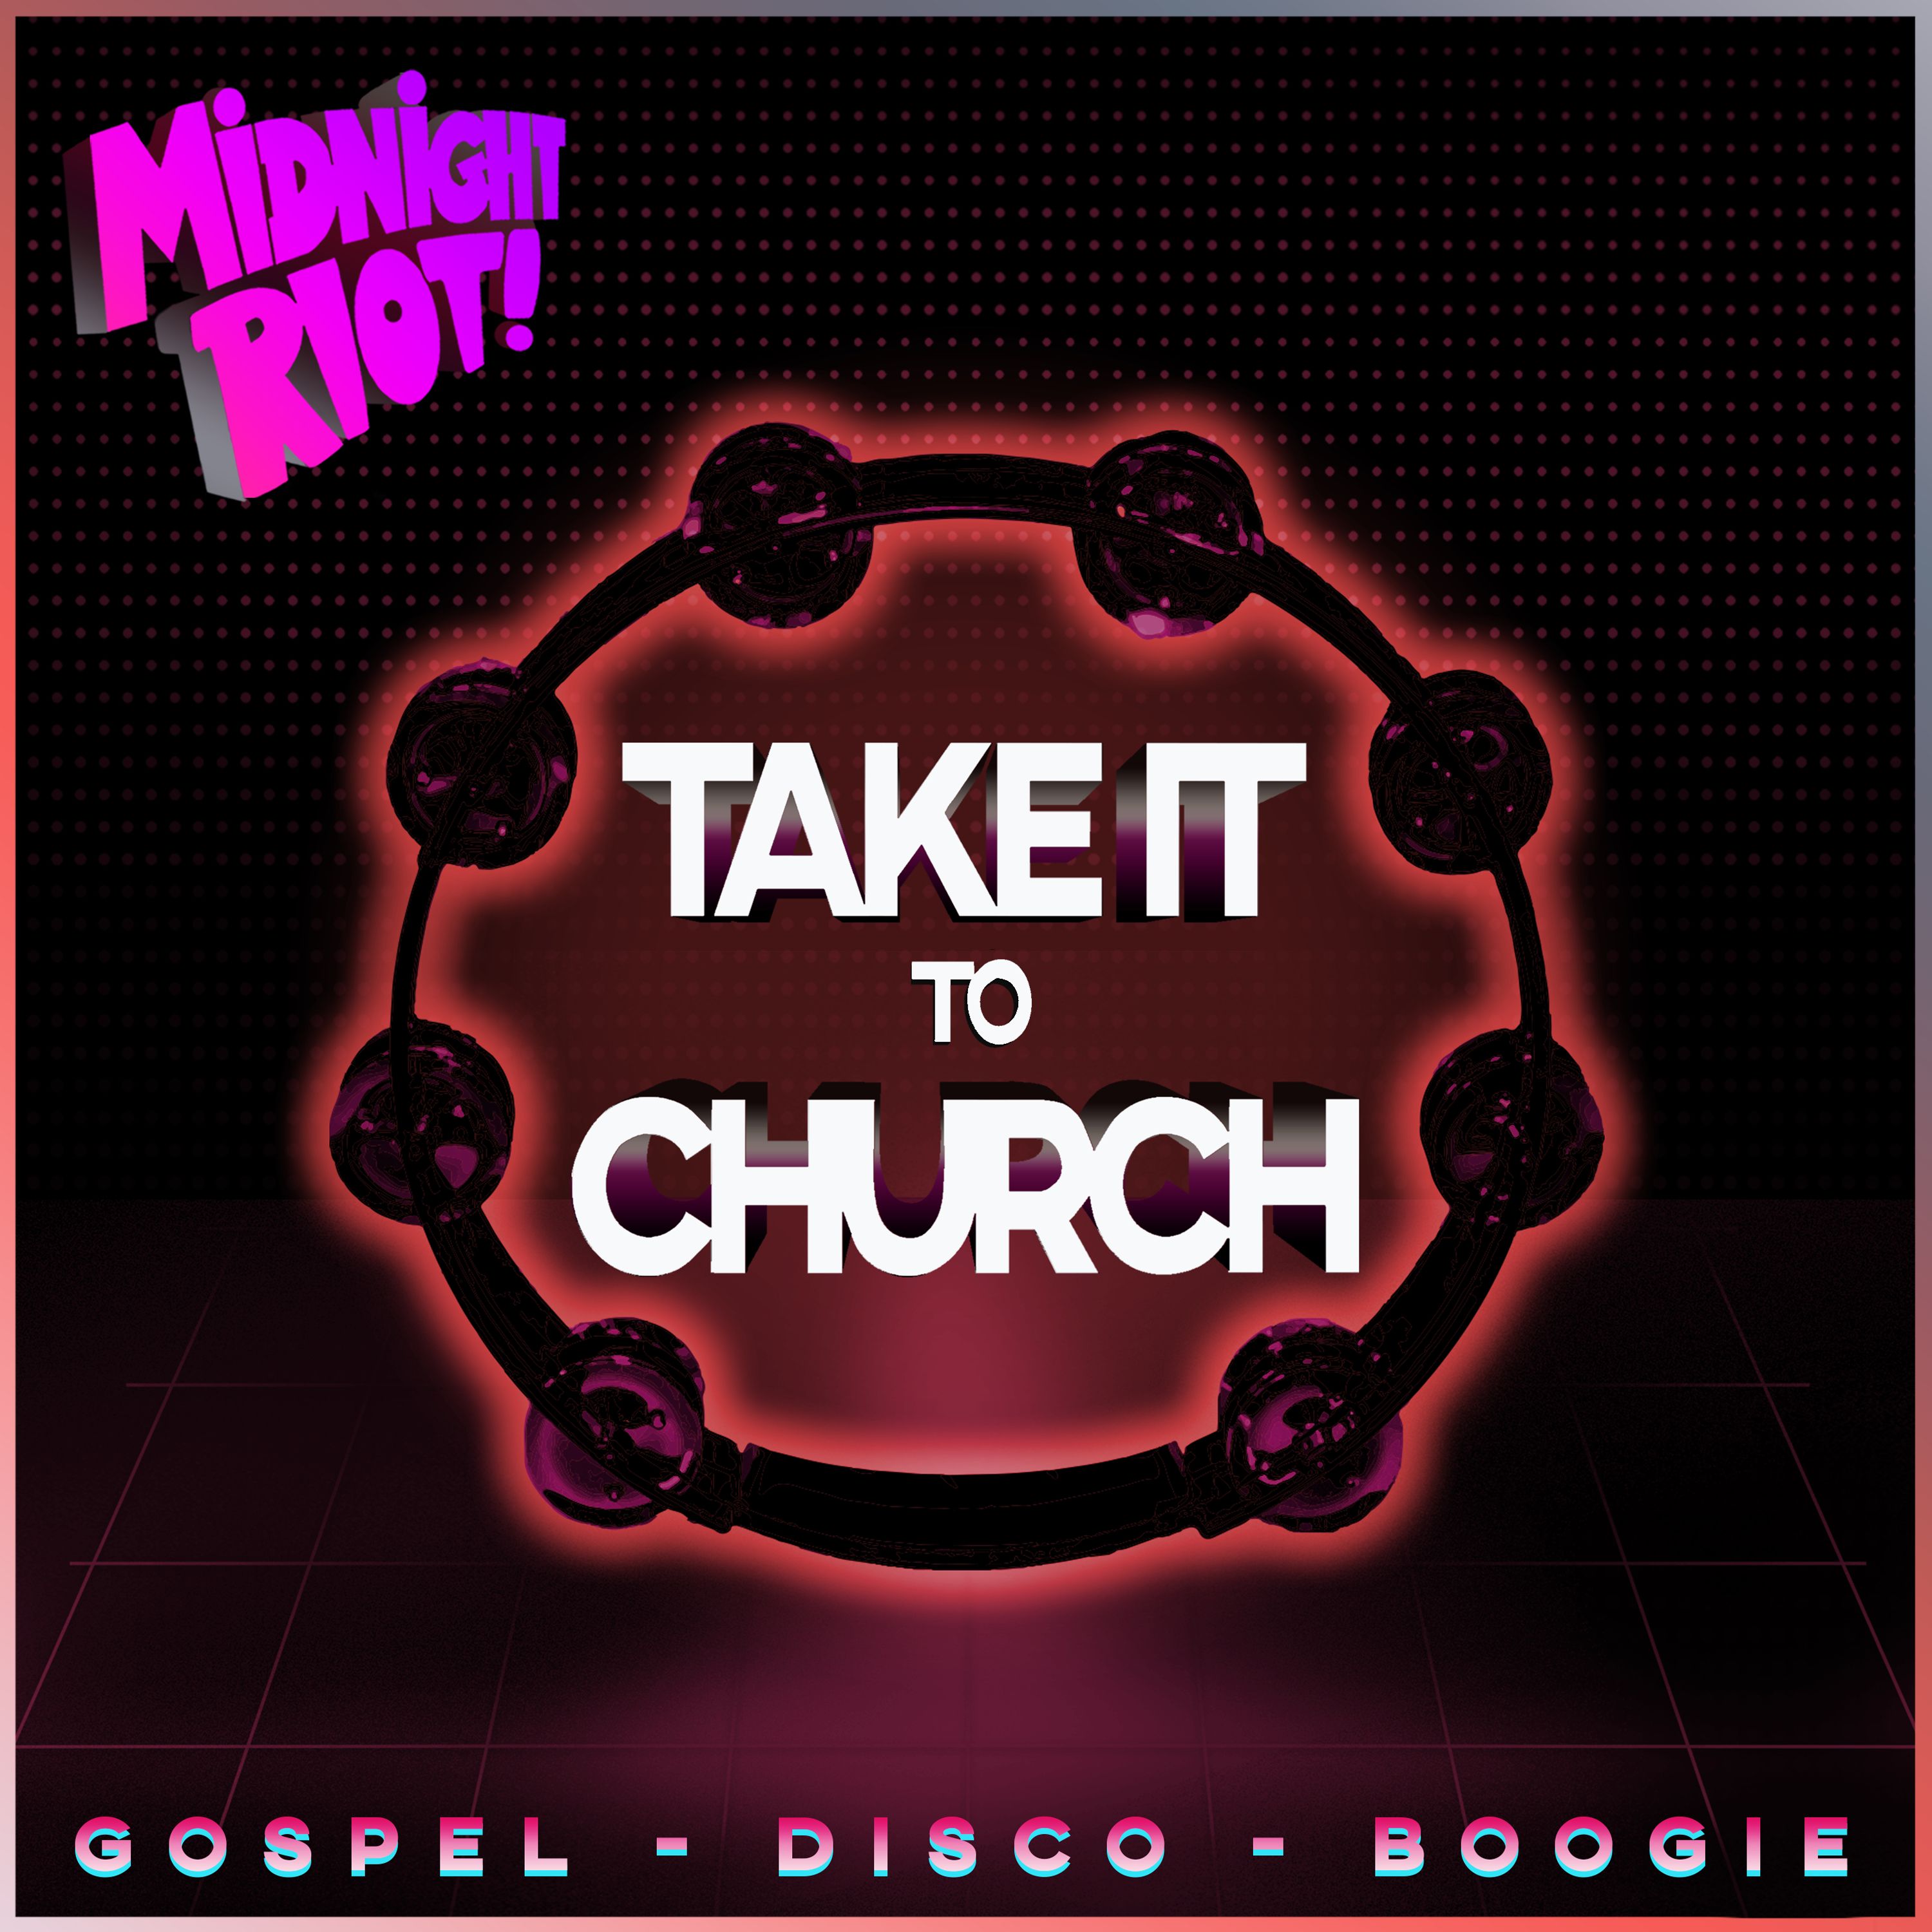 MIDNIGHT RIOT PRESENTS - TAKE IT TO CHURCH - YAM WHO? MIX